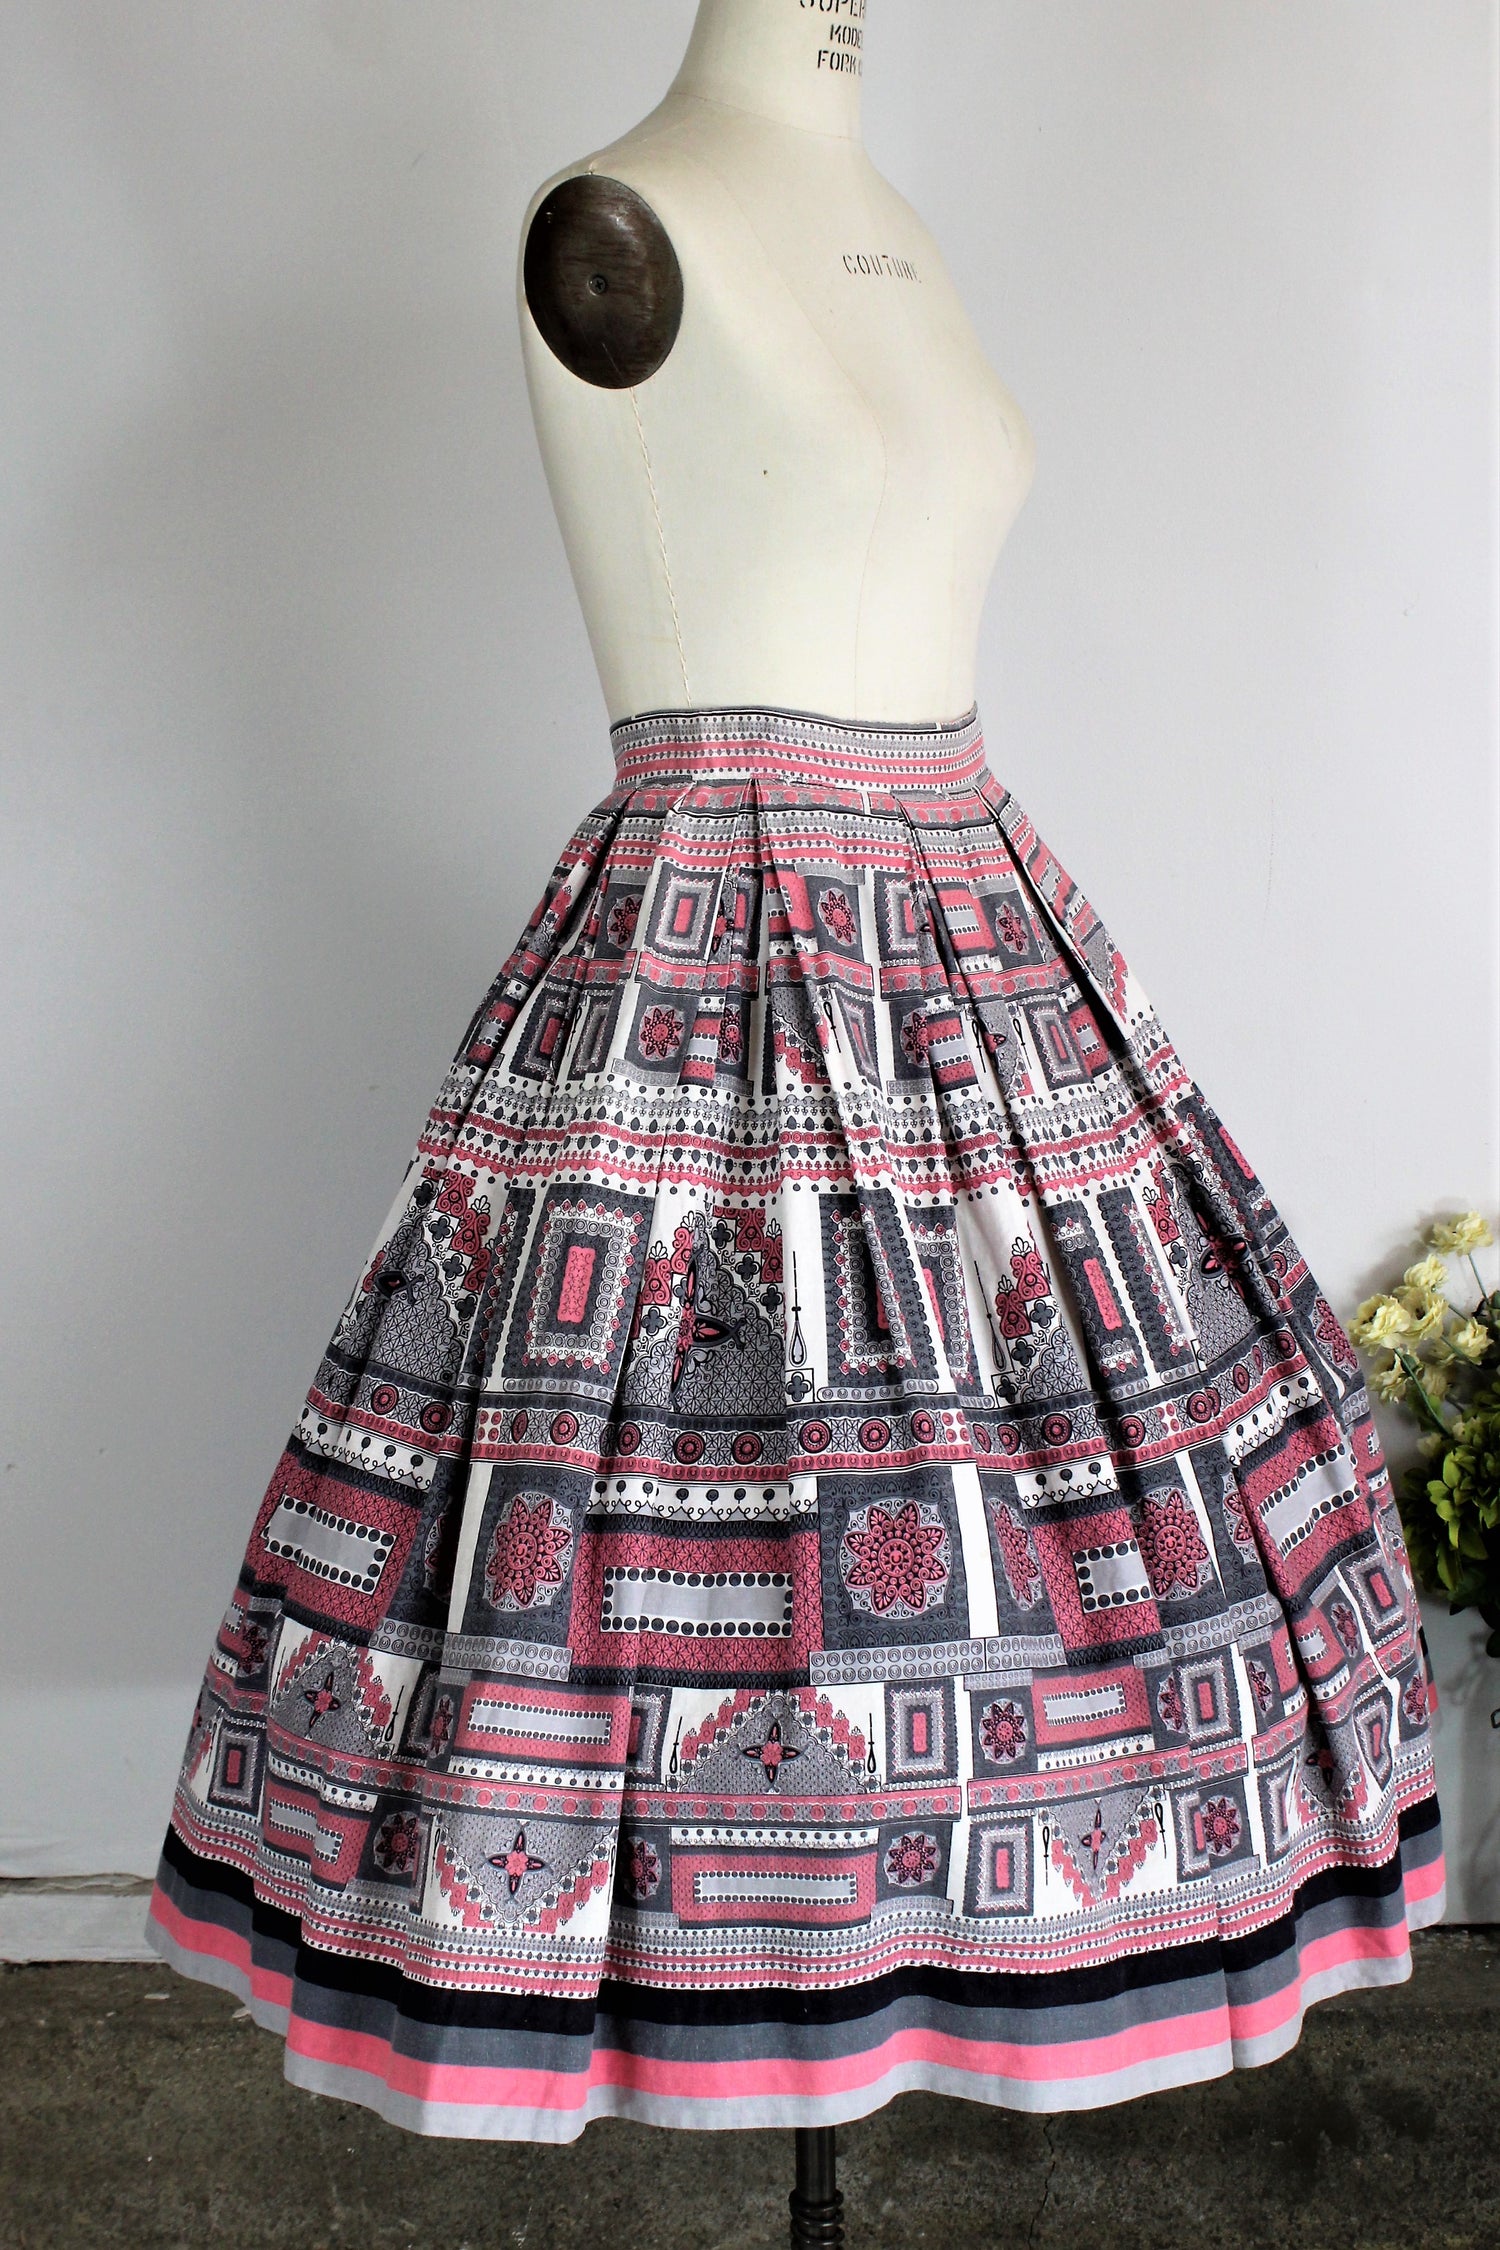 Vintage 1950s Full Skirt Novelty Print in Pink Black Gray And White Cotton